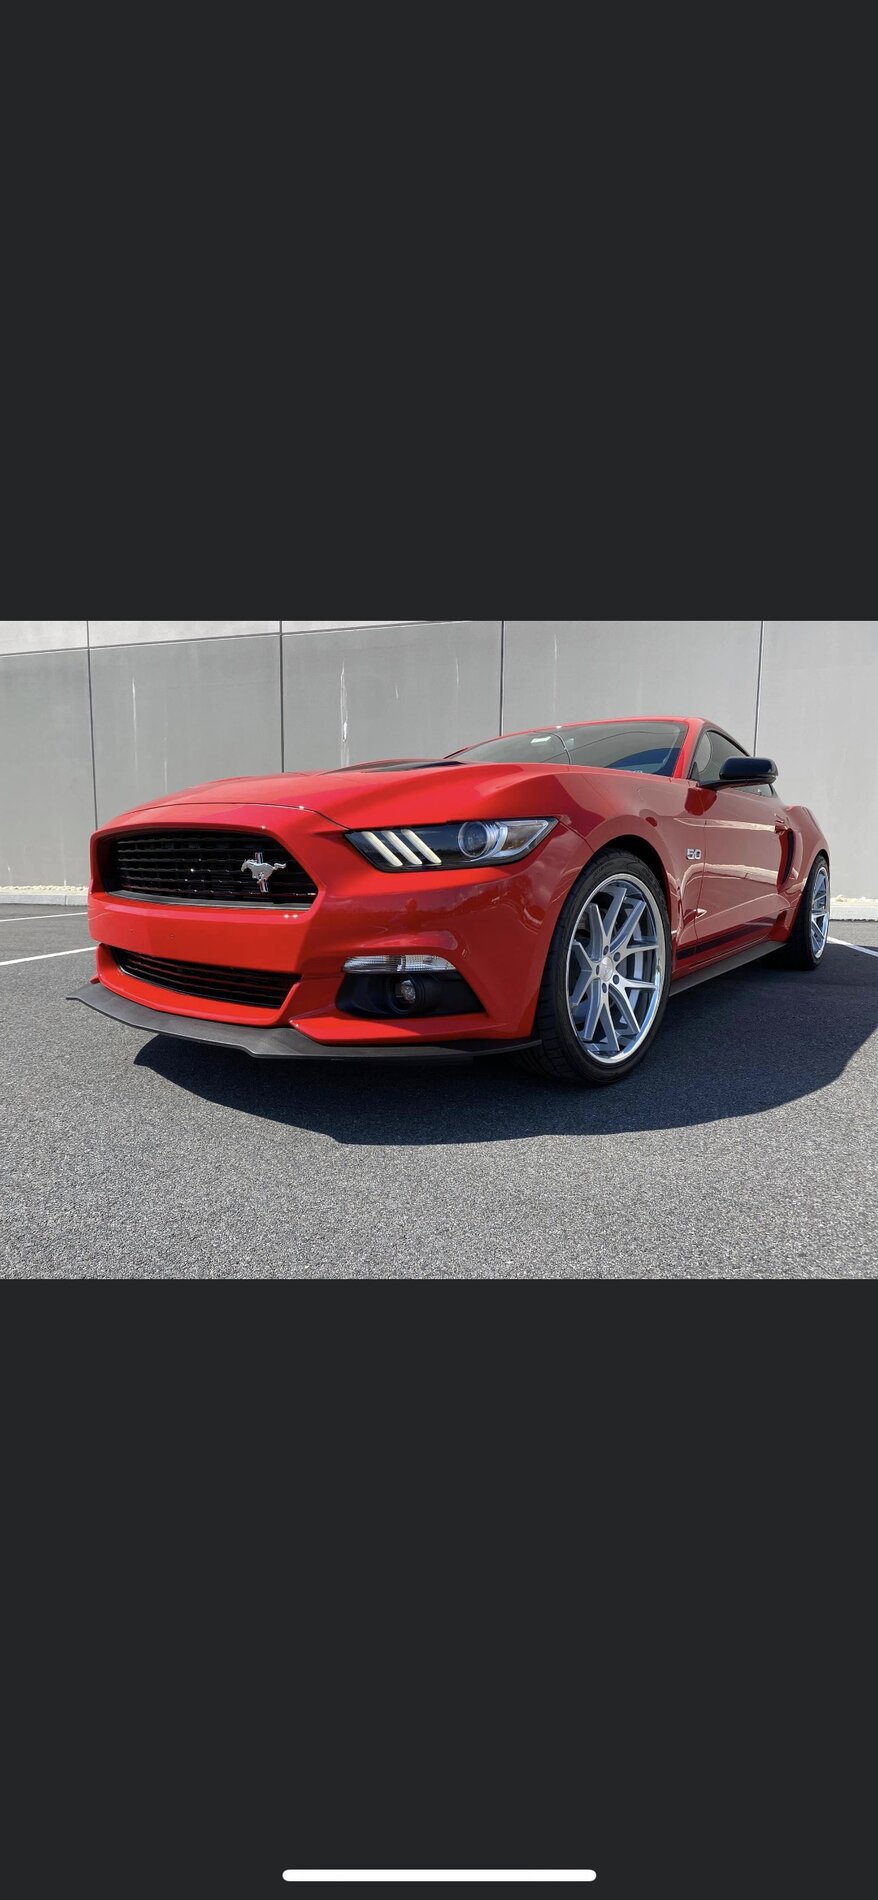 S650 Mustang Introduce Yourself to Mustang7G! 4CAE9071-B974-4A58-BCD7-B803E9C7223B